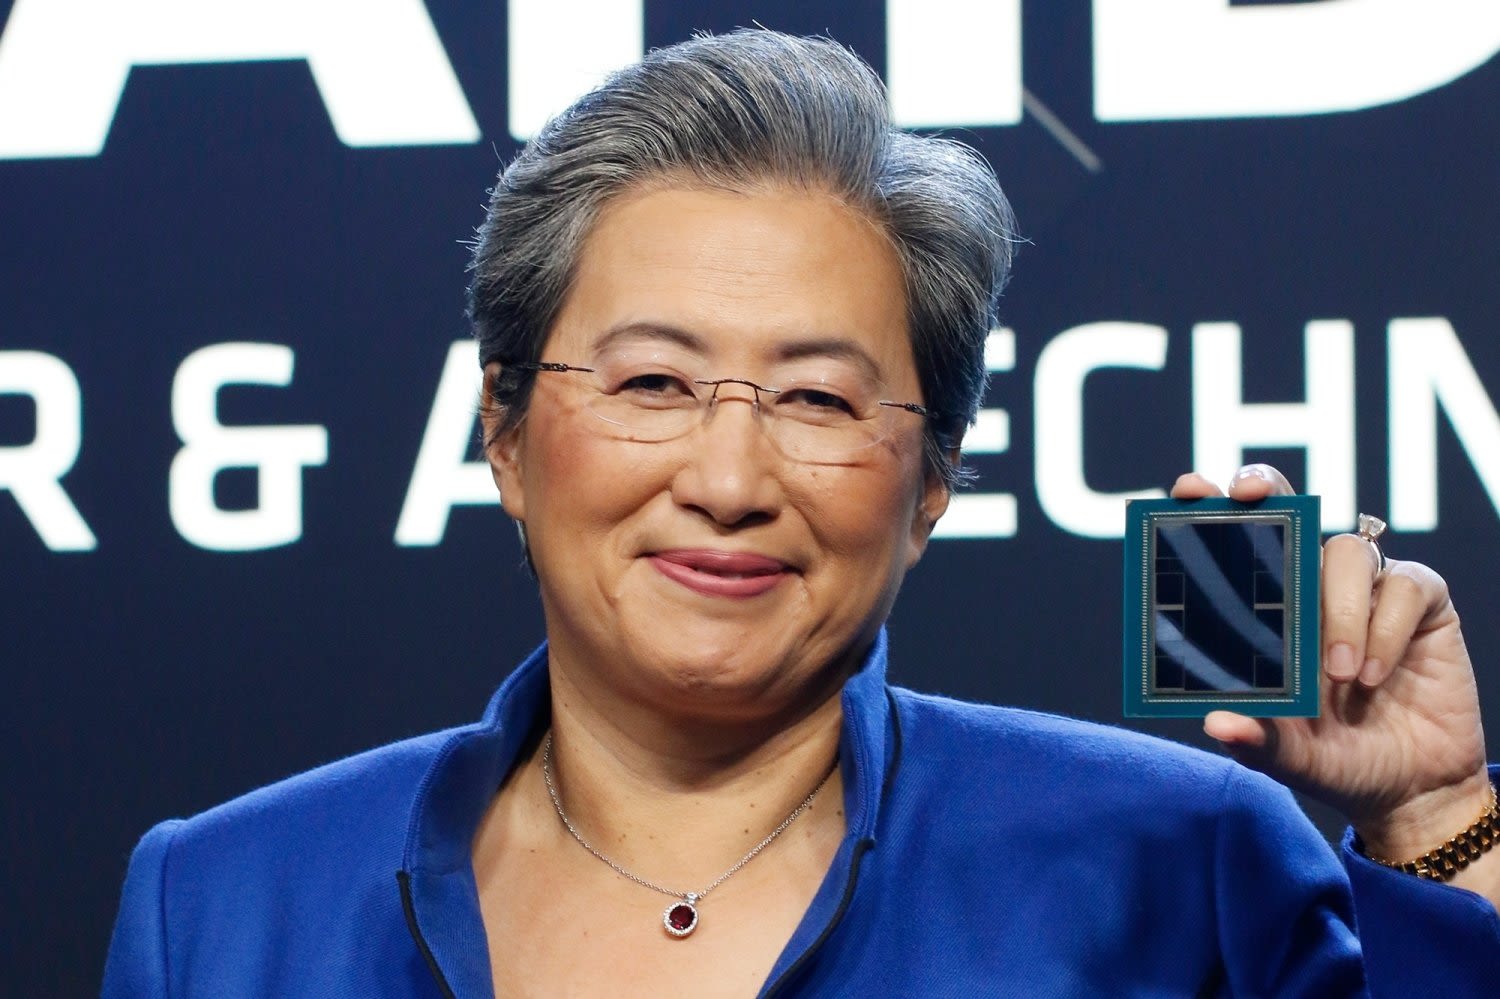 Lisa Su says AMD is on track to a 100x power efficiency improvement by 2027